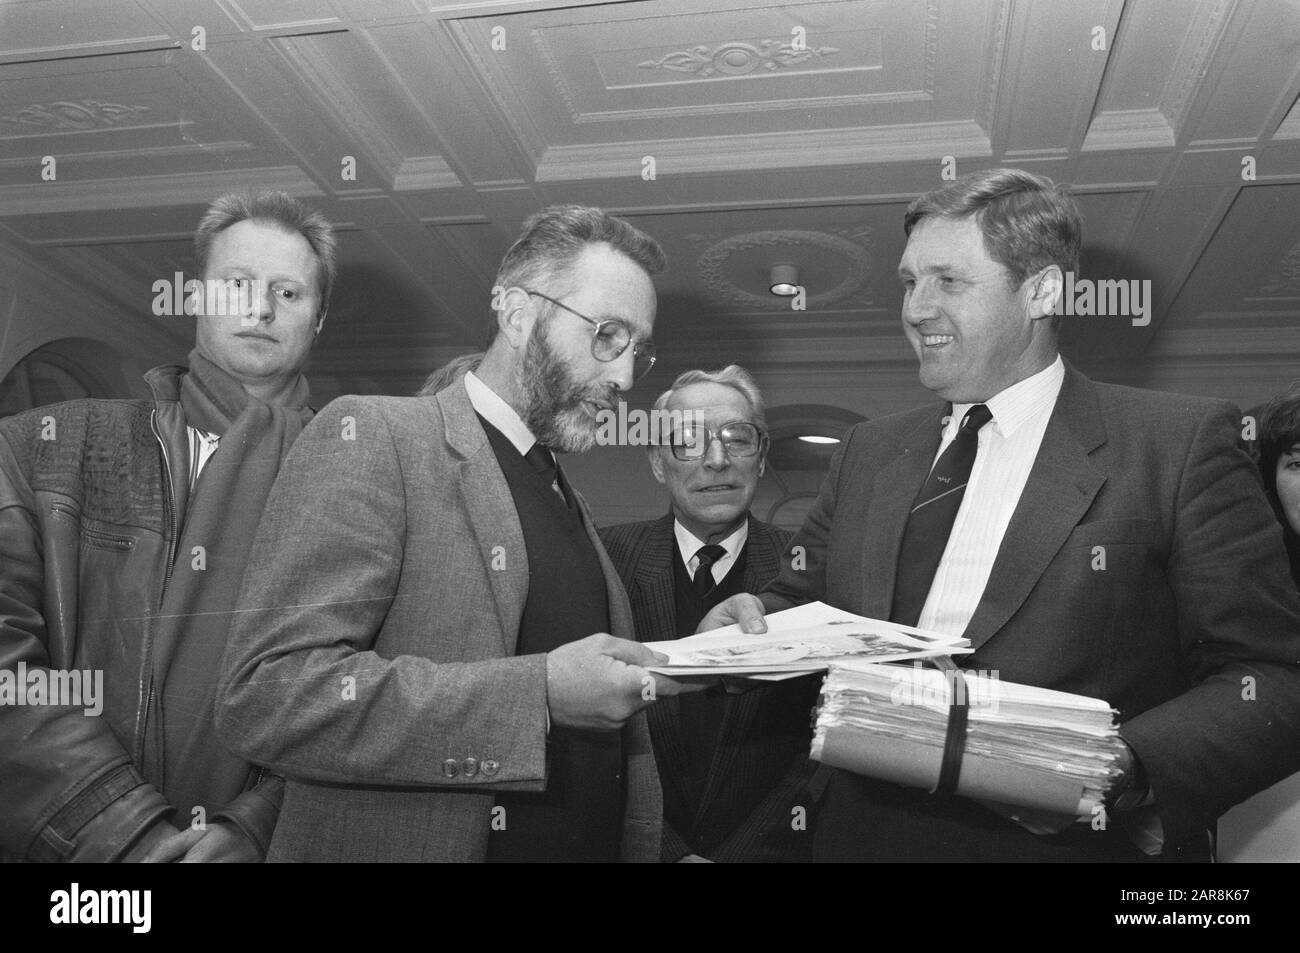 Stichting Pitt Bull Interests offers report to Kamercie Agricultural; Chairman Van Herpen (SPBB) (l) and President Blaunt (r) Date: December 6, 1988 Keywords: REPORTS, chamber commissions Personal name: Blaunt, Cie Stock Photo